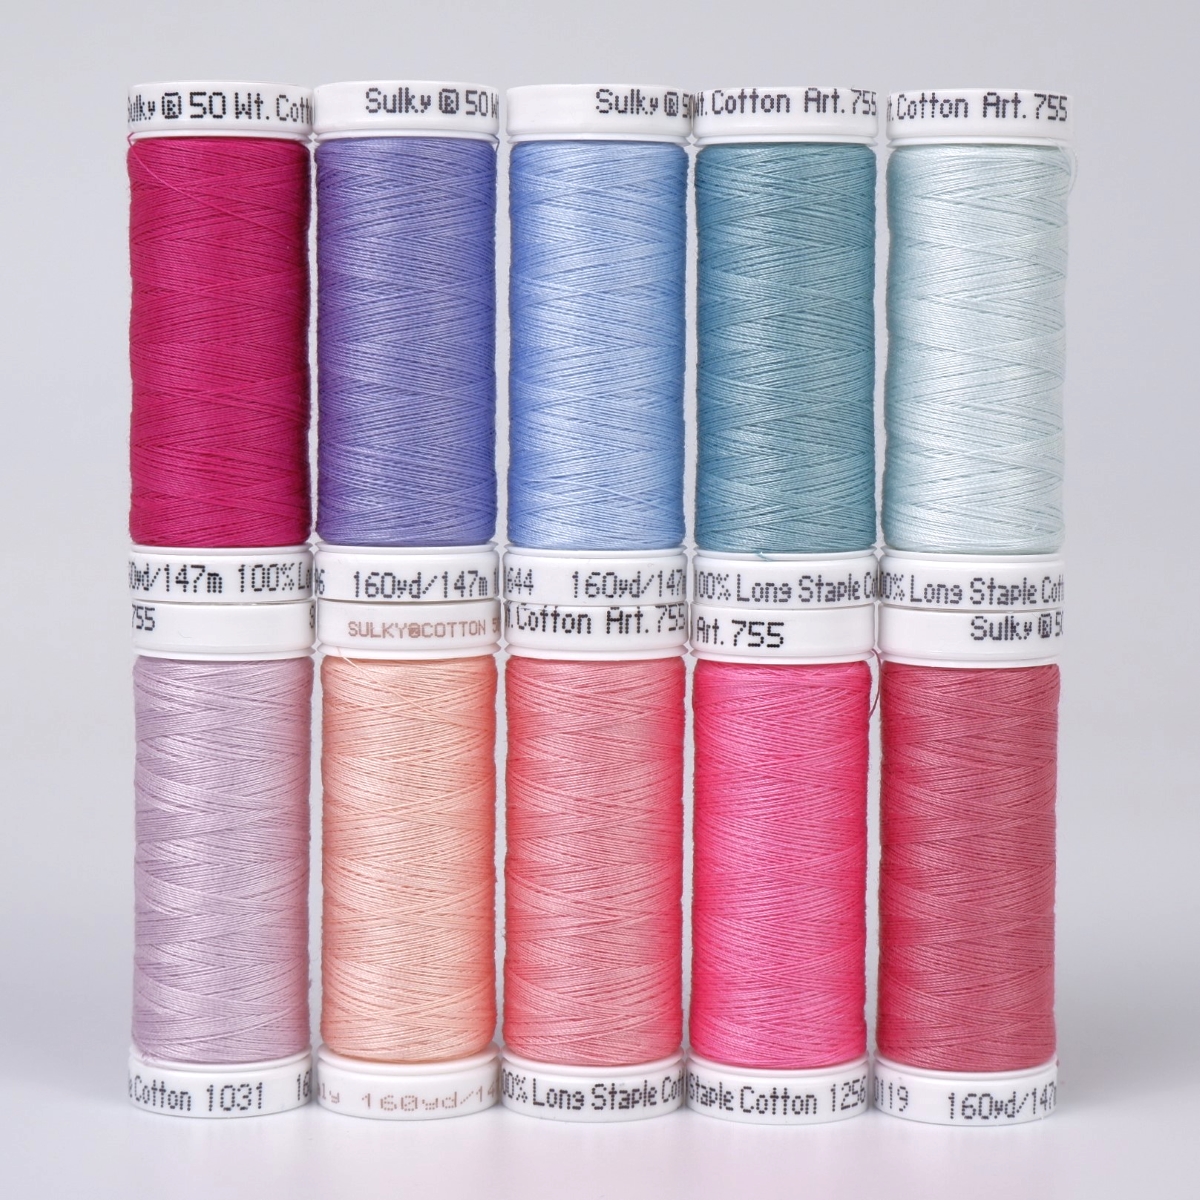 SULKY COTTON 50 - BLOOMS AND BREEZES
(10x 147m Snap Spools)